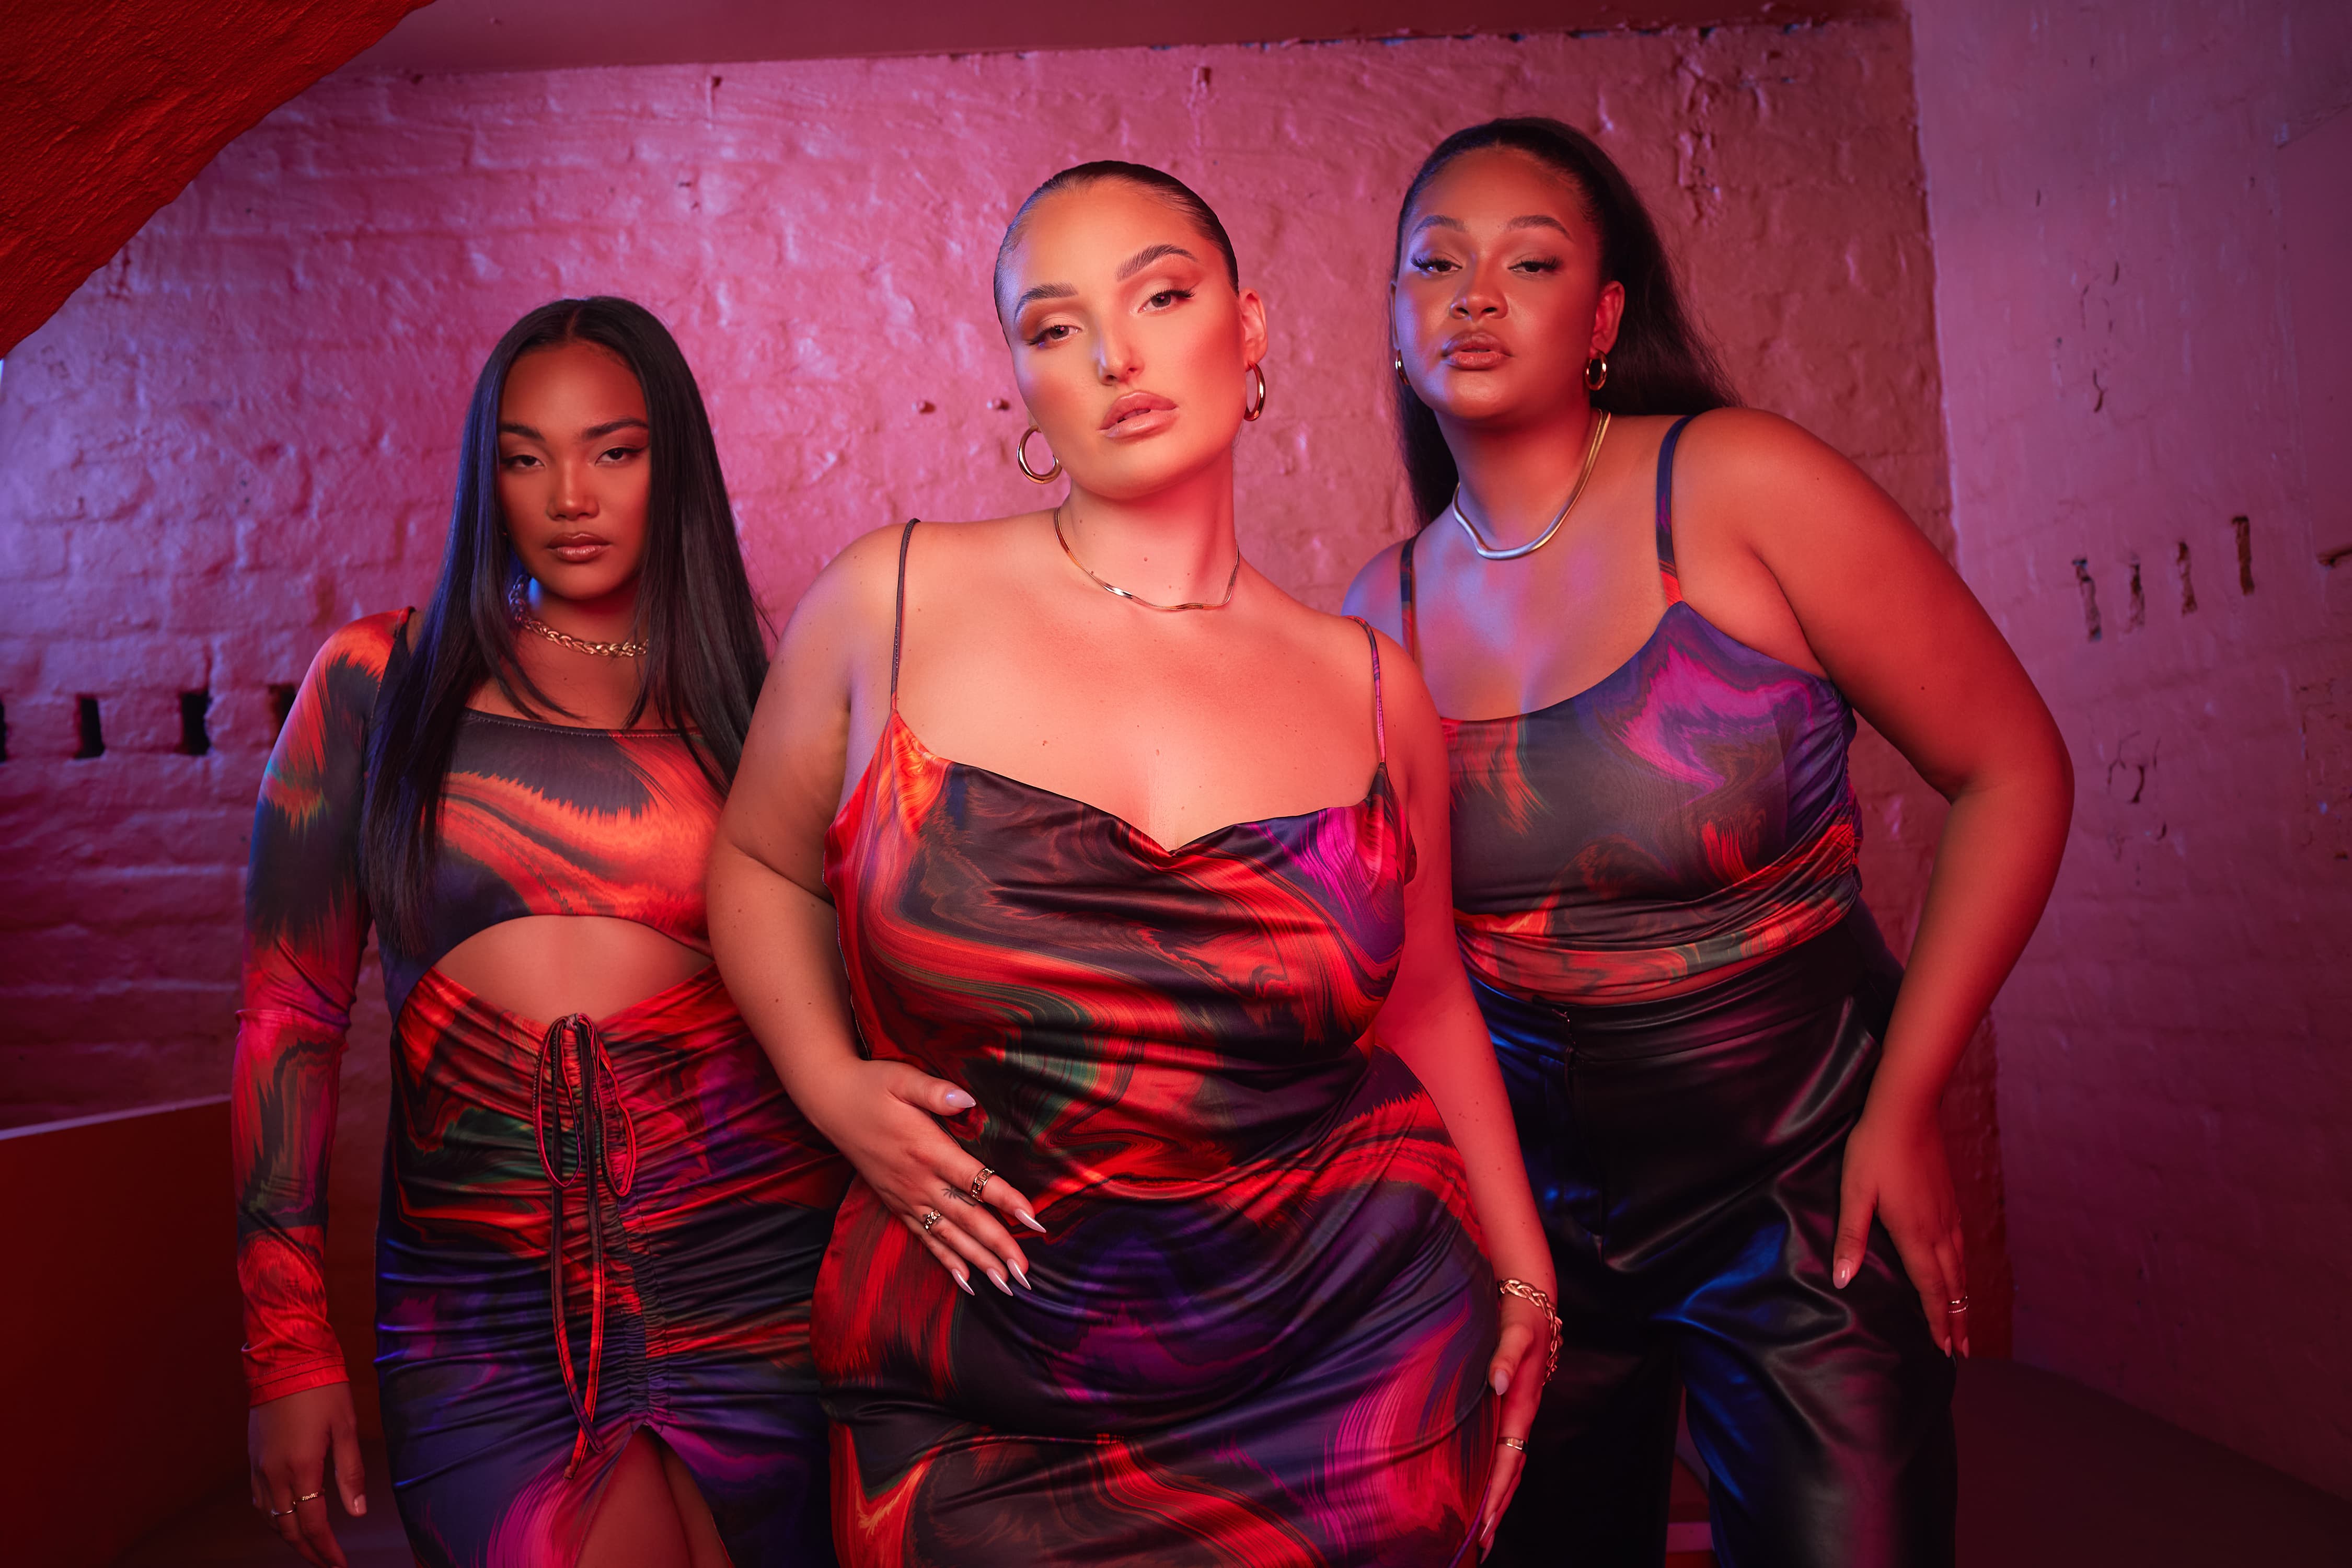 Watch: Riley x Showpo - Our Confident, Elevated & Empowering New Collection